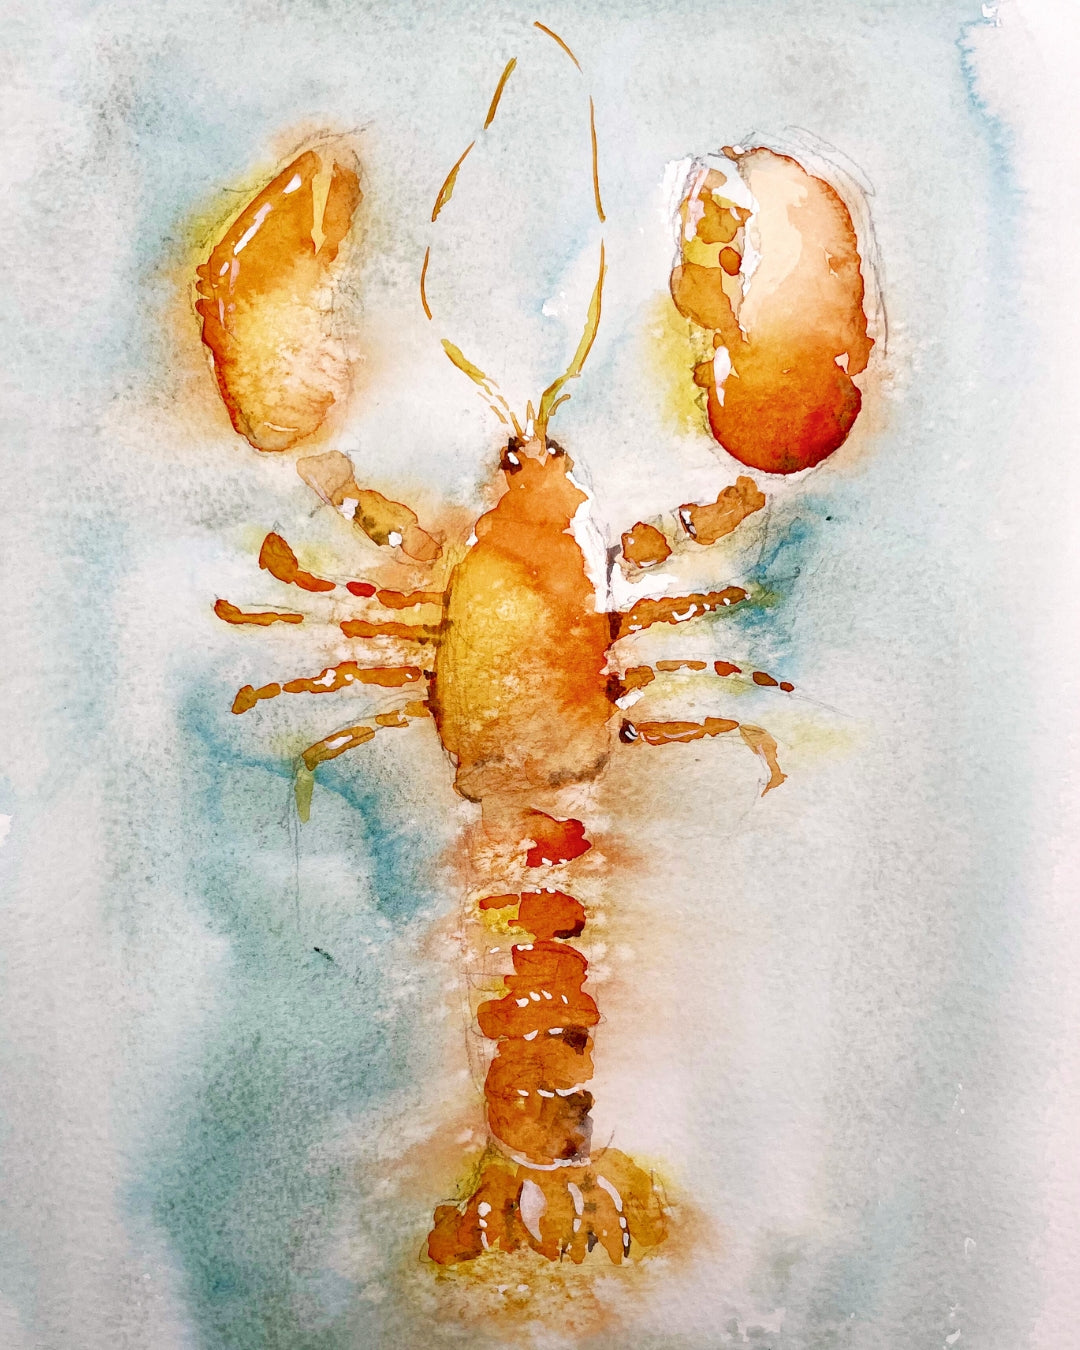 OCT 5th - Inspired by the Sea – Watercolour Workshops, North Berwick (Luminous Lobsters & Crustaceans)